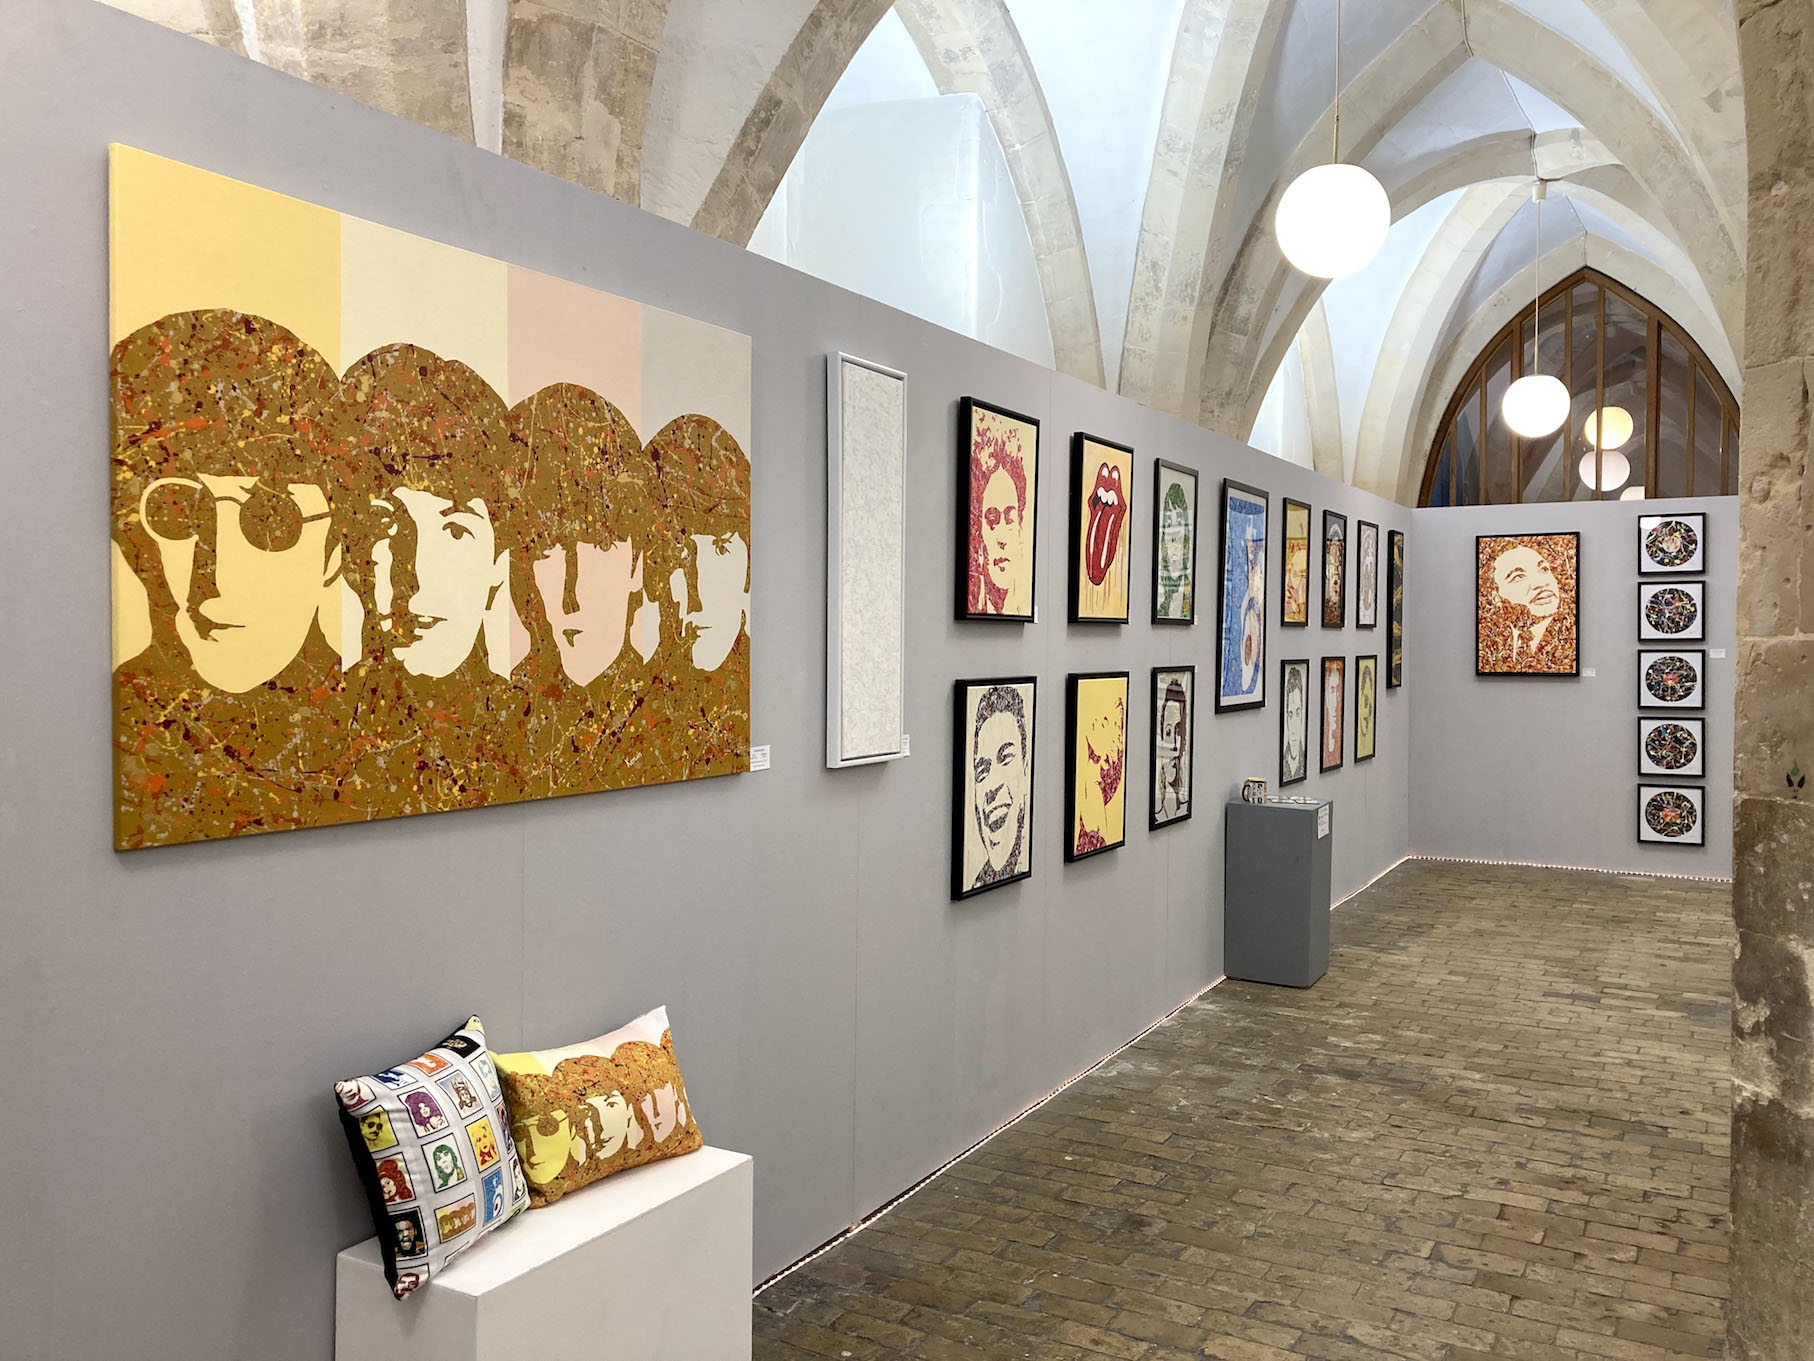 Kerwin Blackburn exhibiting his Jackson Pollock-inspired pop art music paintings at the Crypt Gallery at Norwich School in Norfolk, February-March 2022 | By Kerwin | The Beatles prints